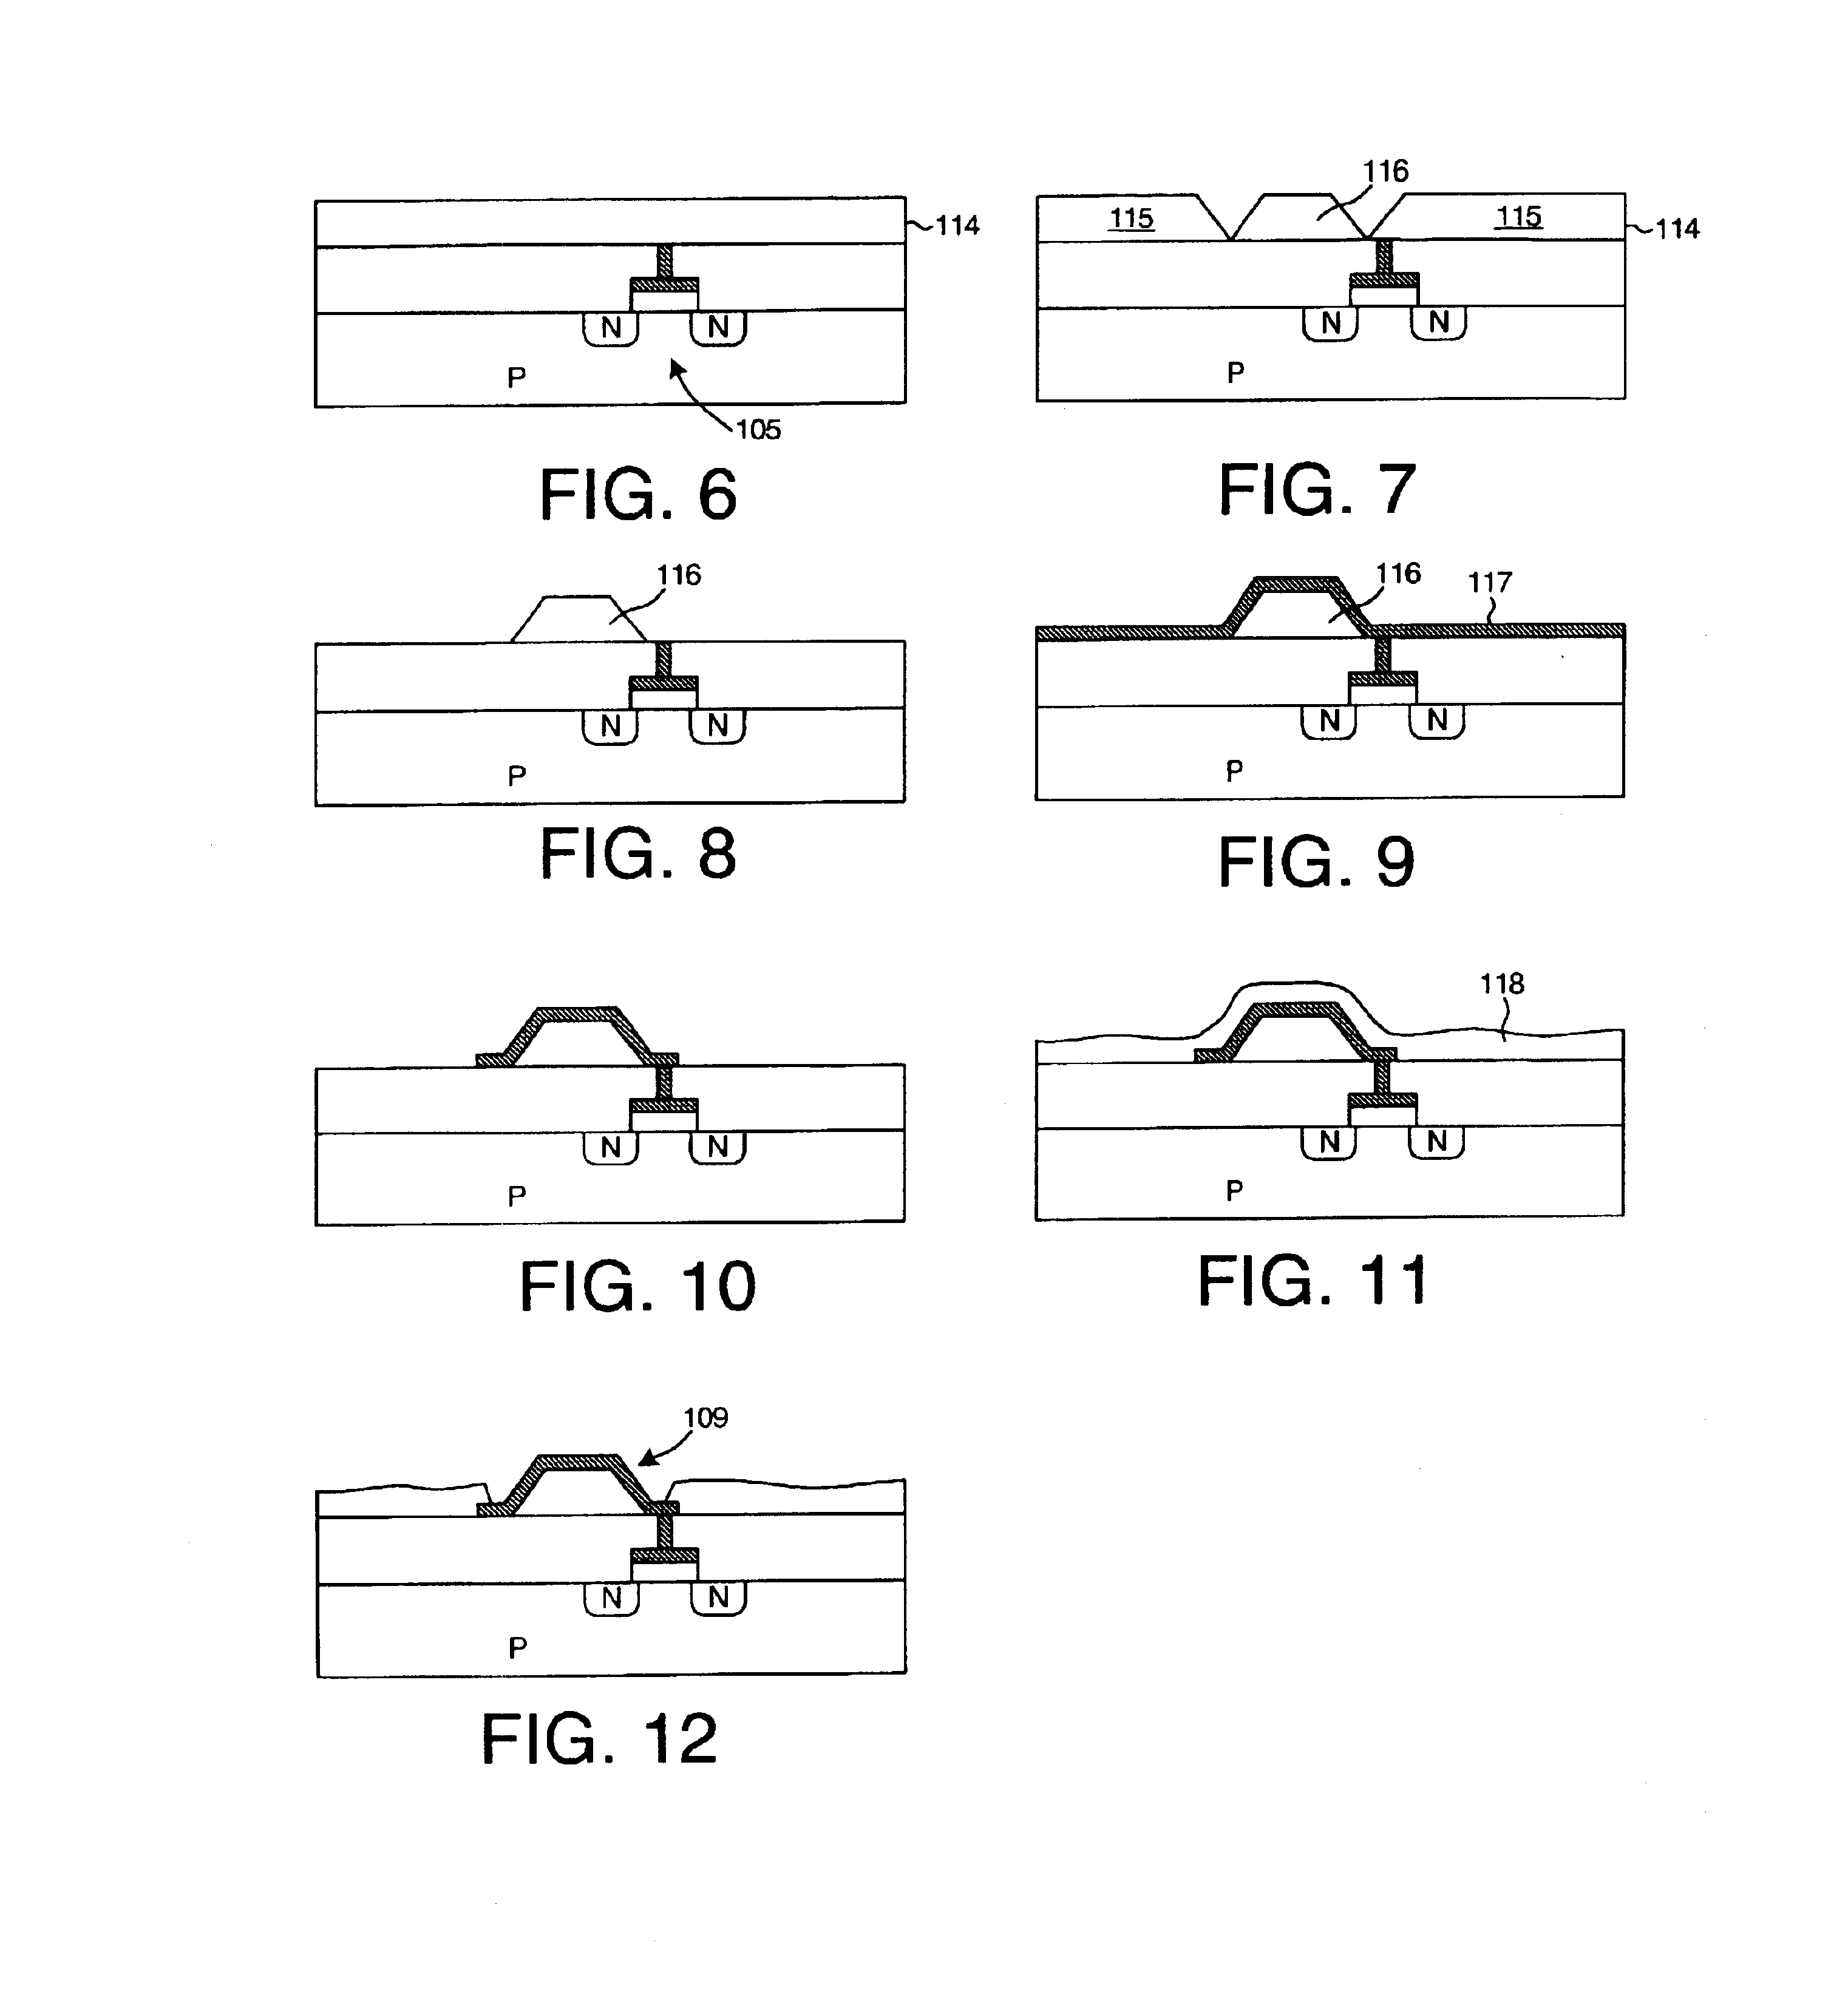 Multi-chip programmable logic device having configurable logic circuitry and configuration data storage on different dice